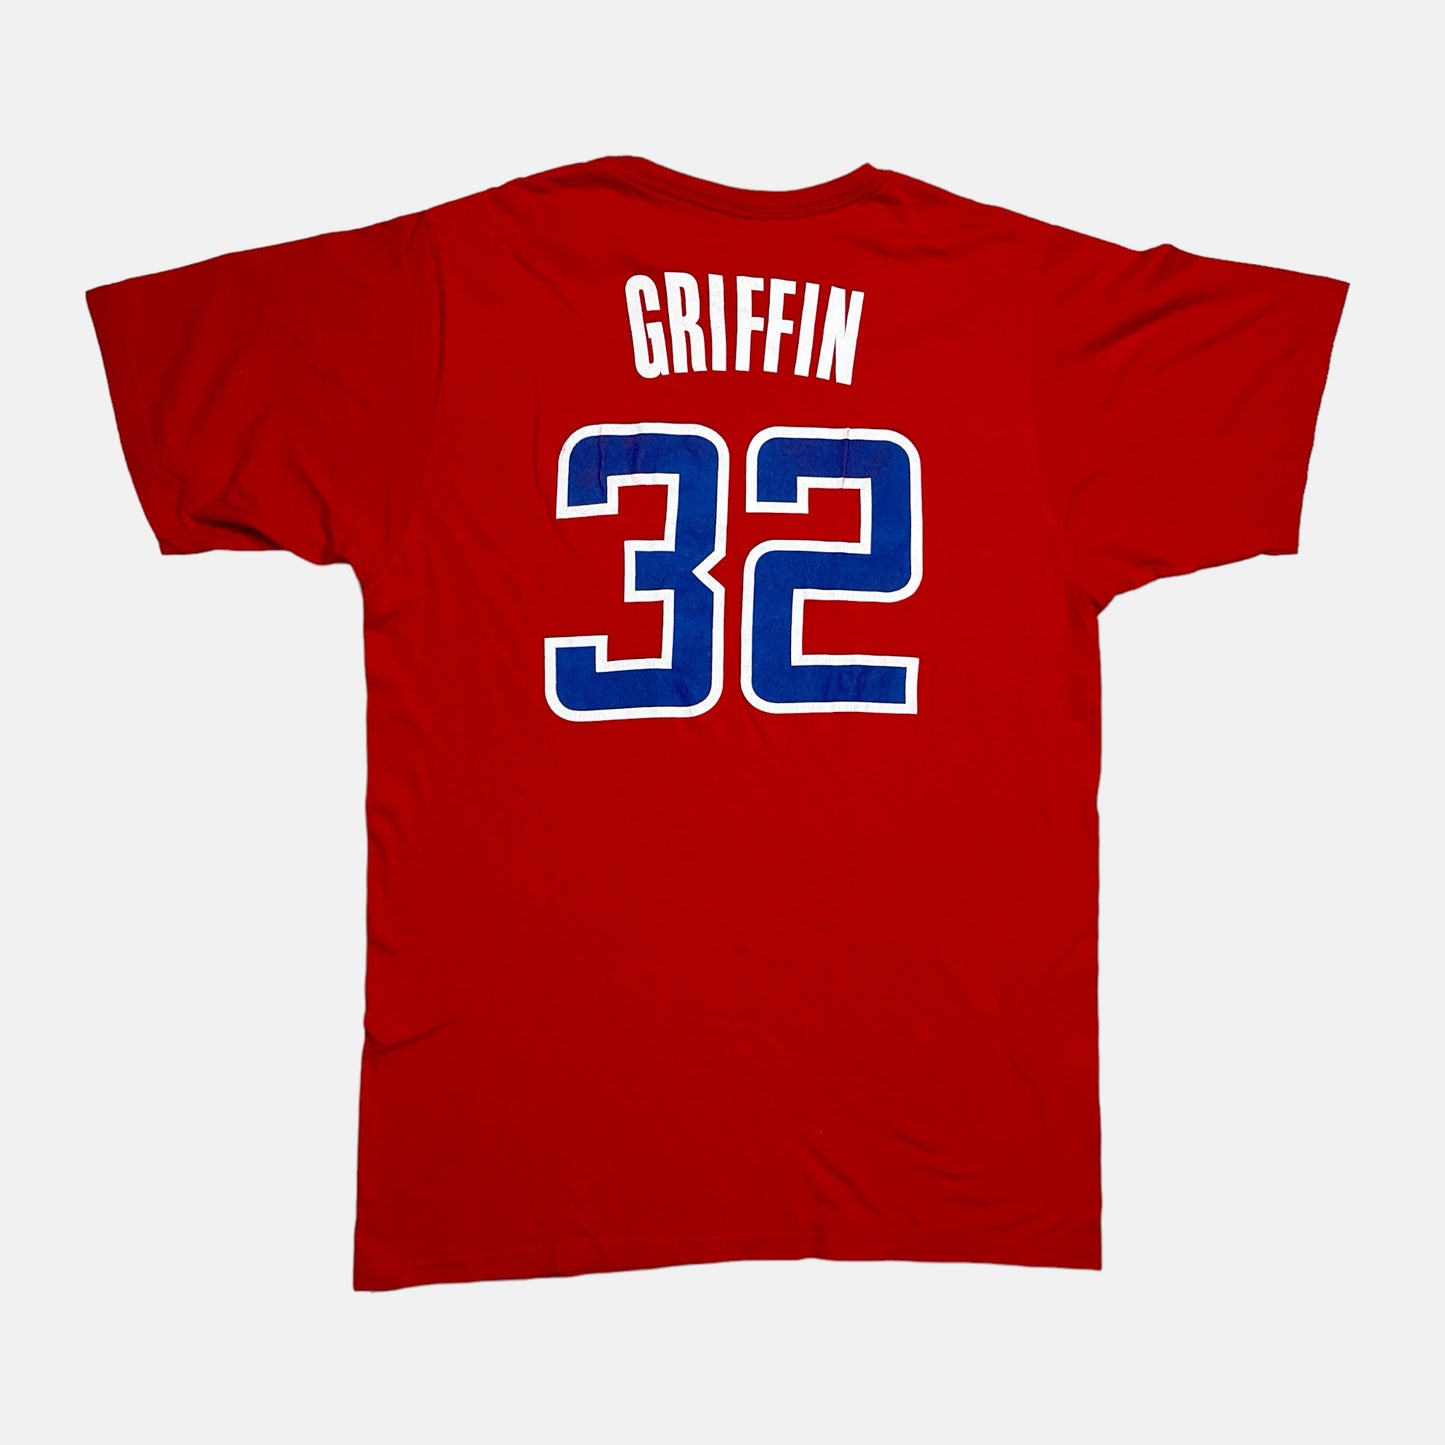 Los Angeles Clippers - Blake Griffin - Größe M - Adidas - NBA Name and Number Shirt